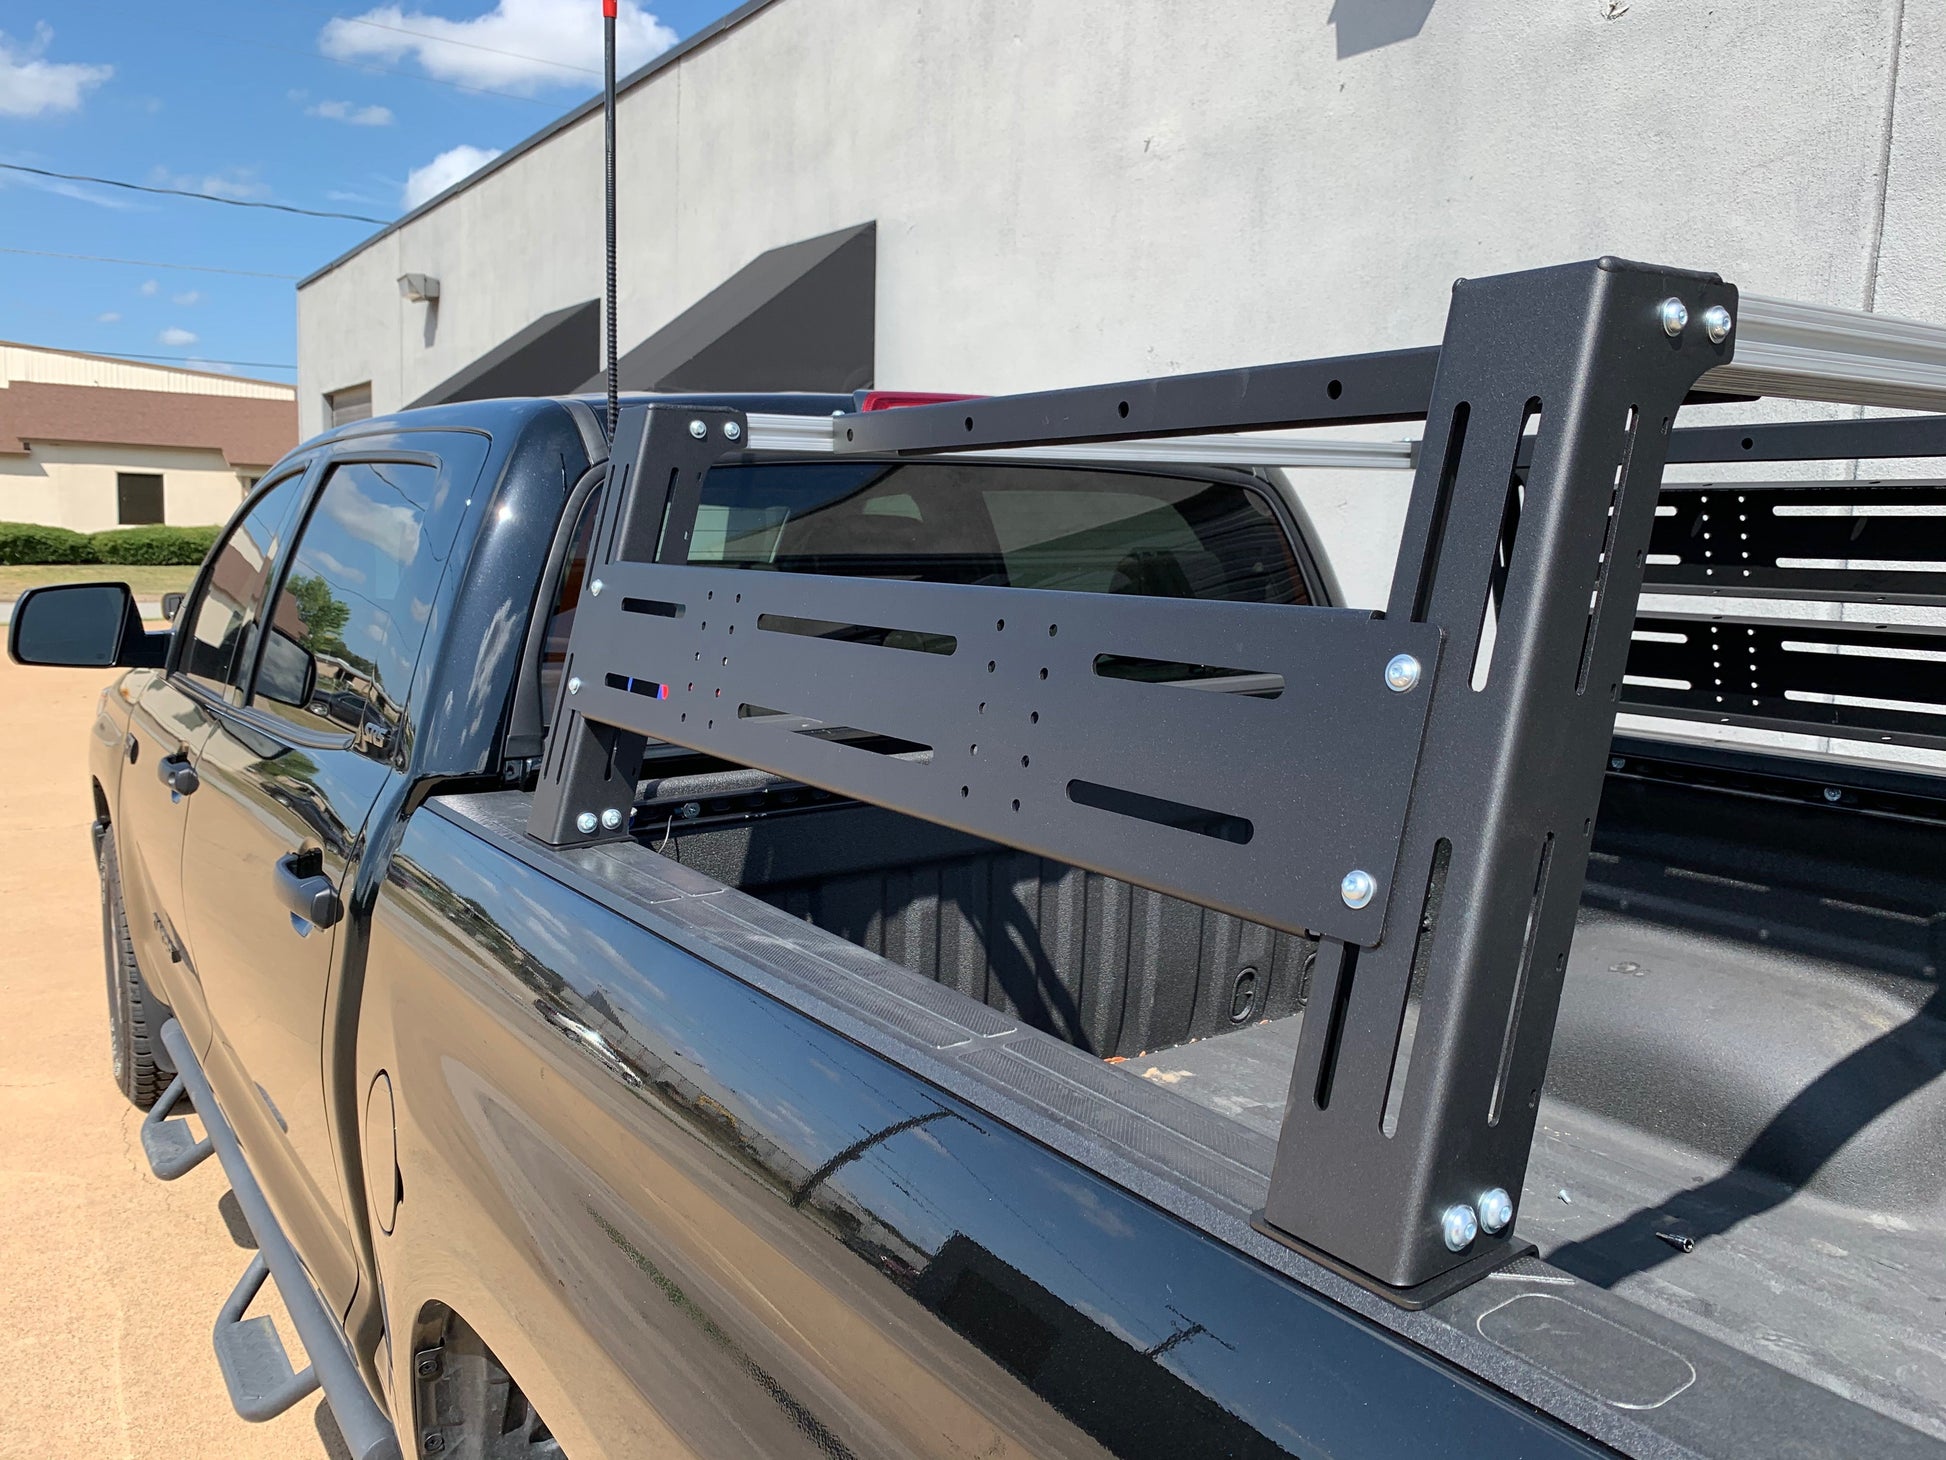 Installed on Car from Side Cali Raised Toyota Overland Bed Rack | 2014-2021 TUNDRA